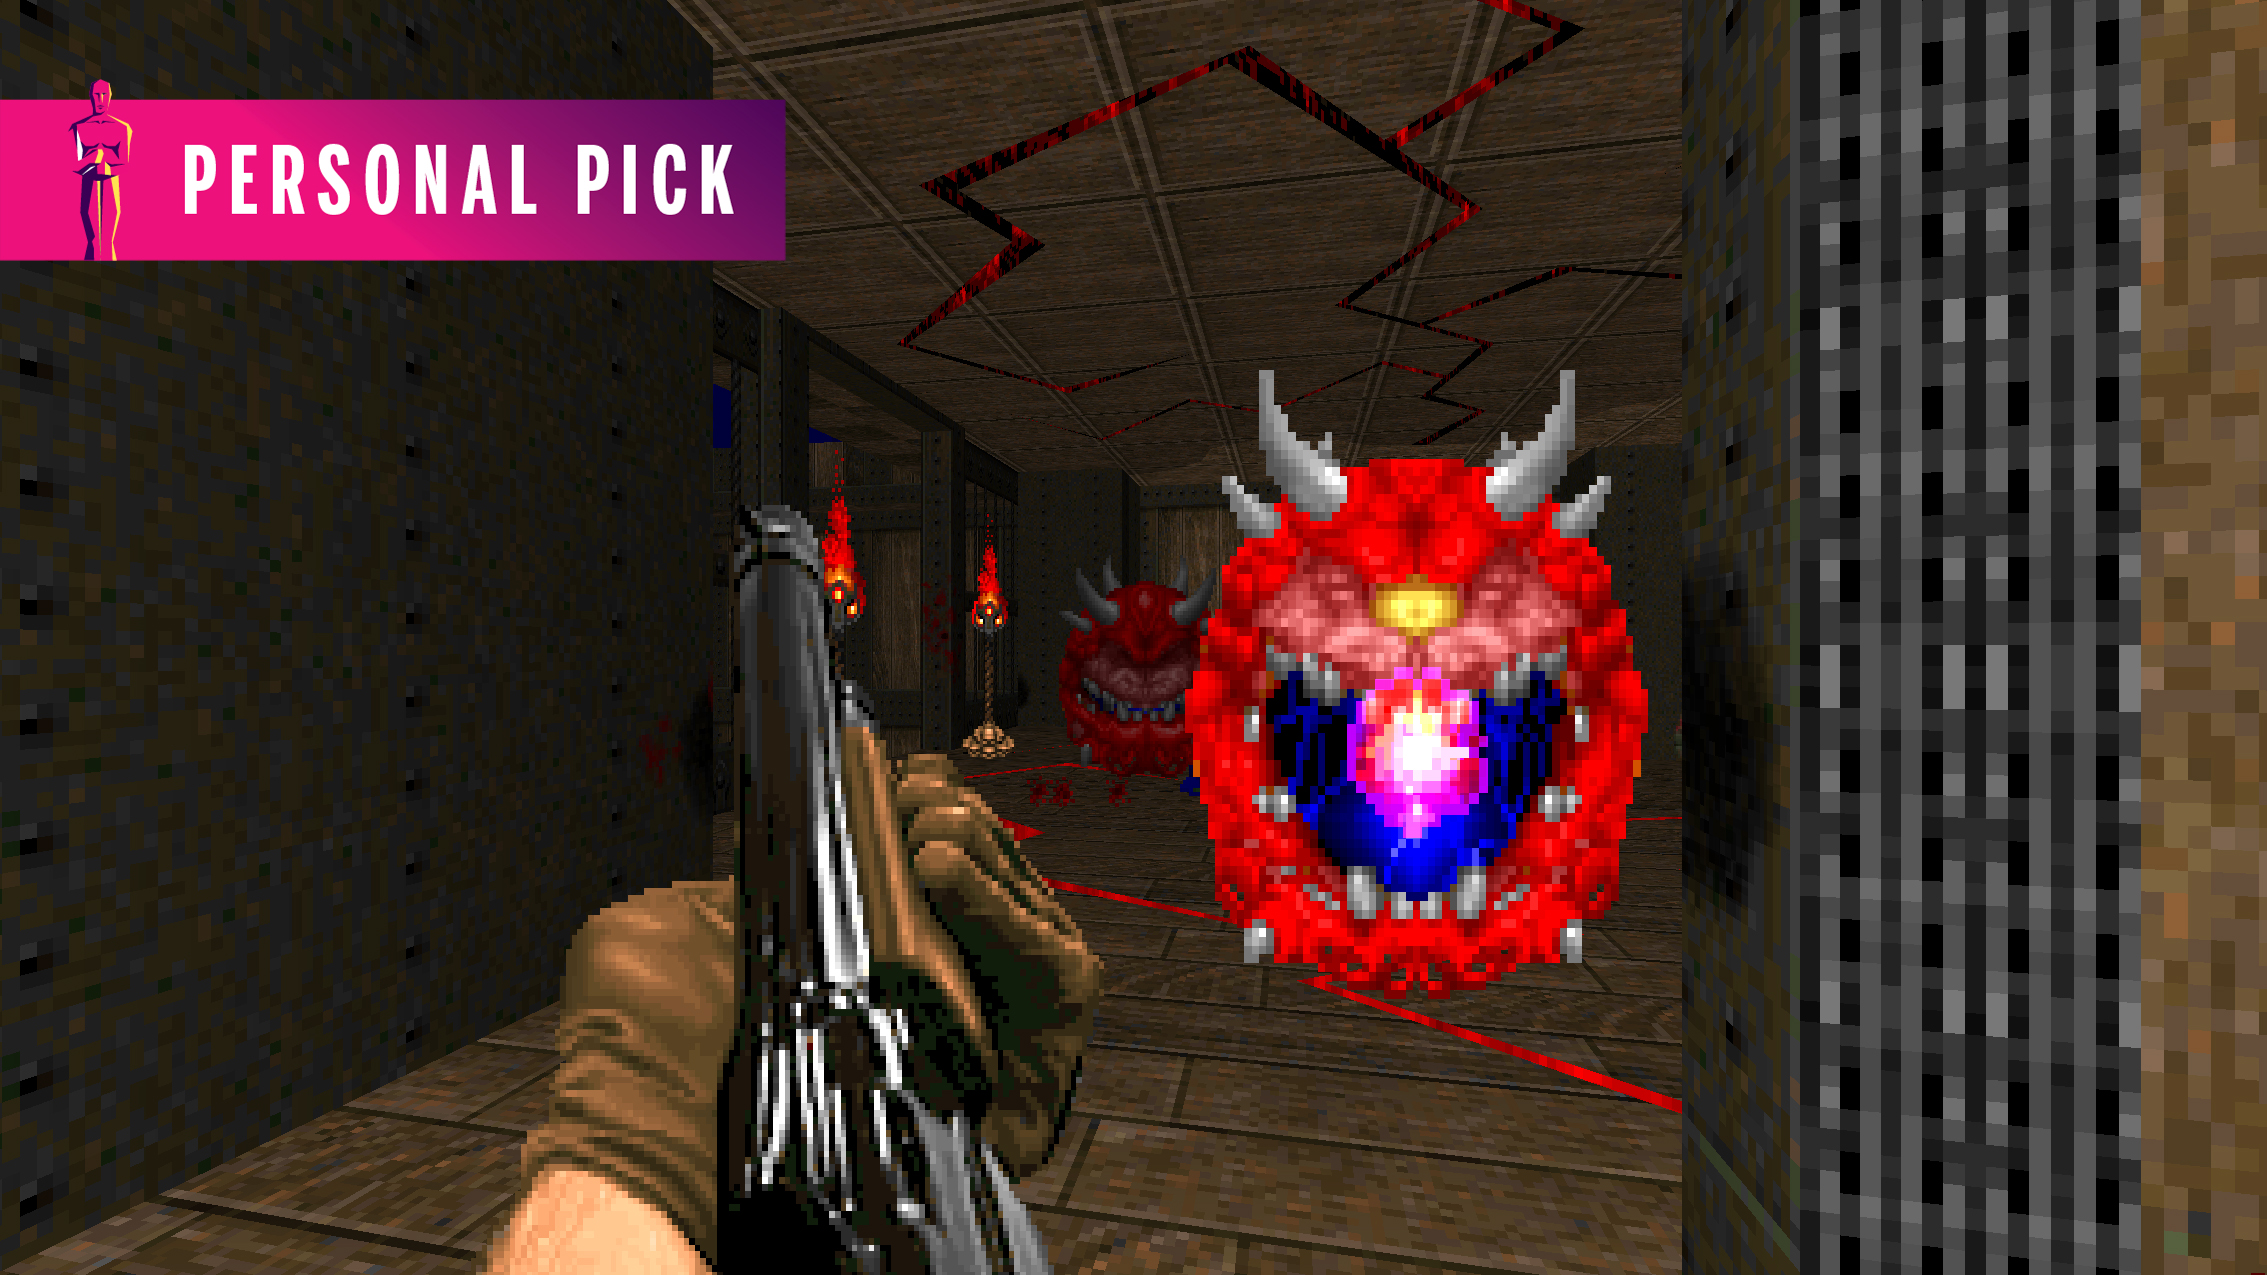  SIGIL II, original Doom's brand new sixth episode, is the most visceral, adrenaline-inducing and brutal PC gaming experience I've had in 2023 